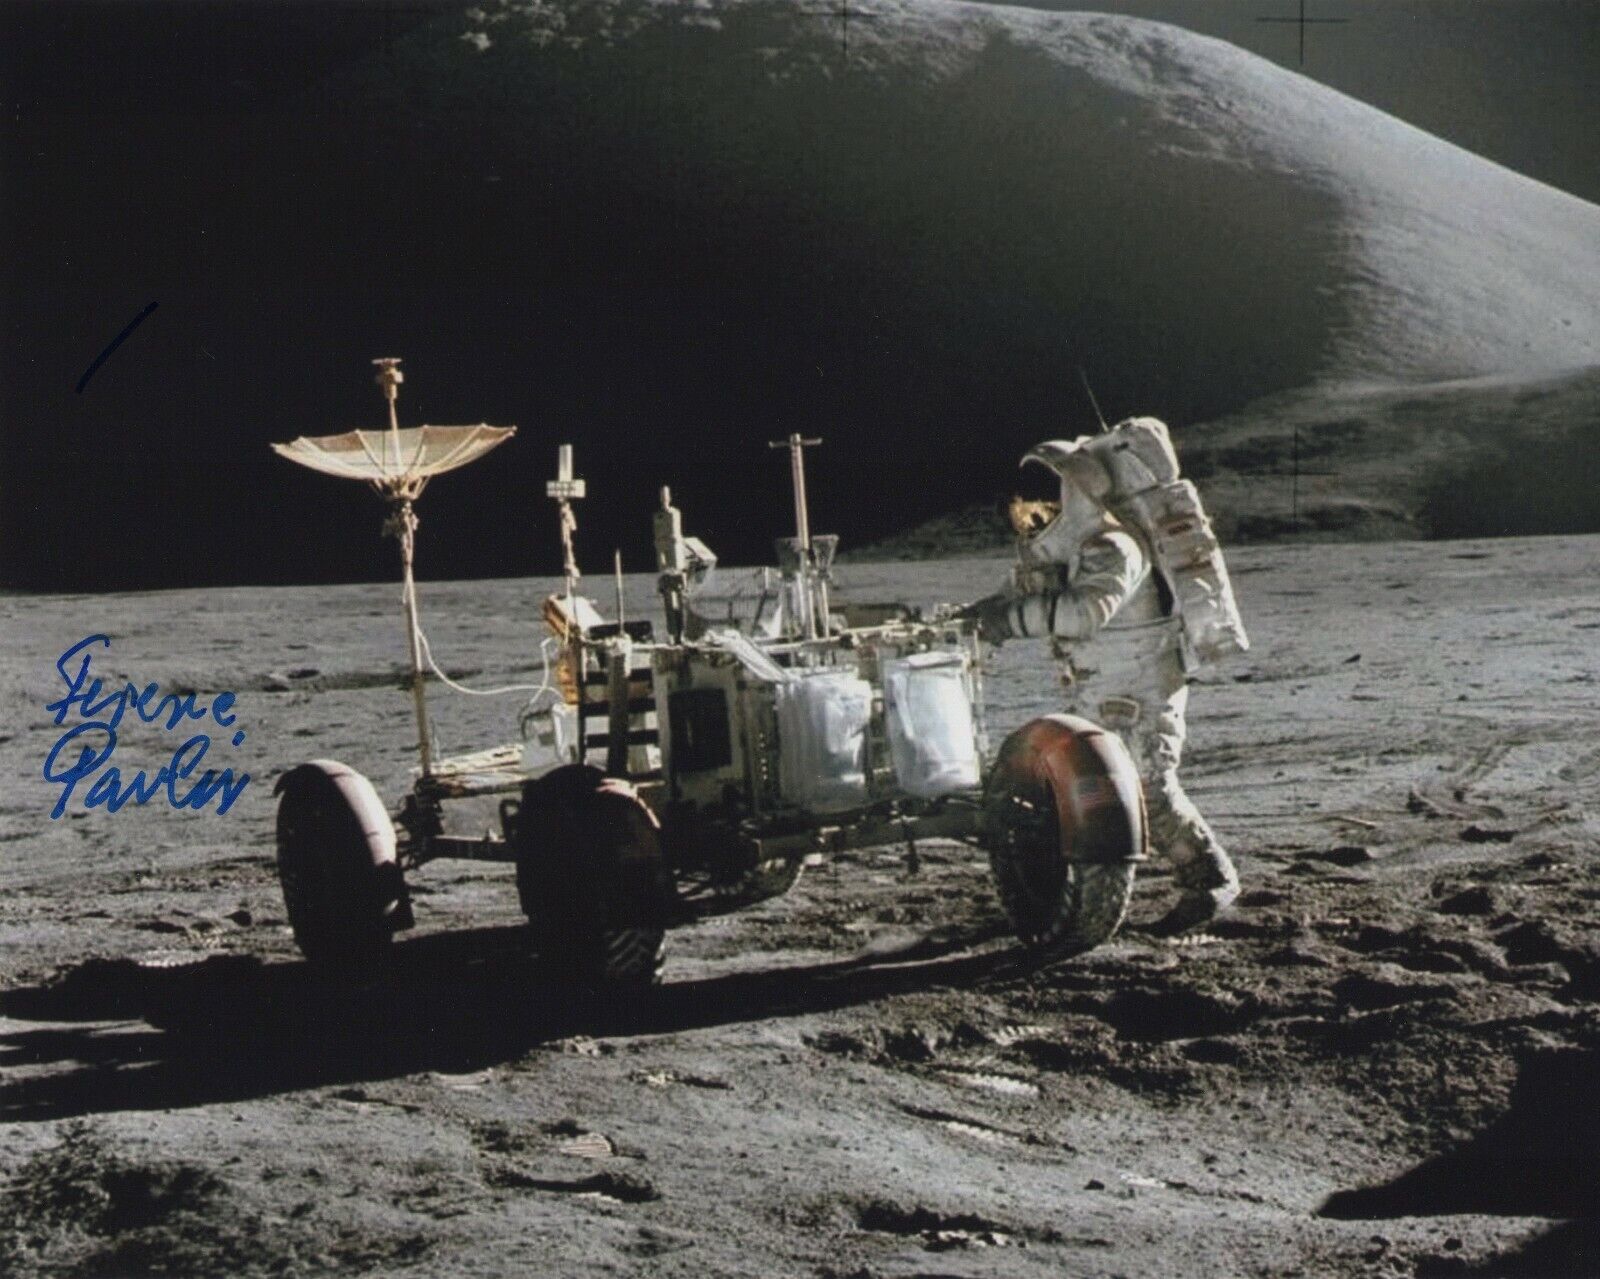 FERENC PAVLICS SIGNED AUTOGRAPH NASA SPACE APOLLO LUNAR ROVER 8X10 Photo Poster painting